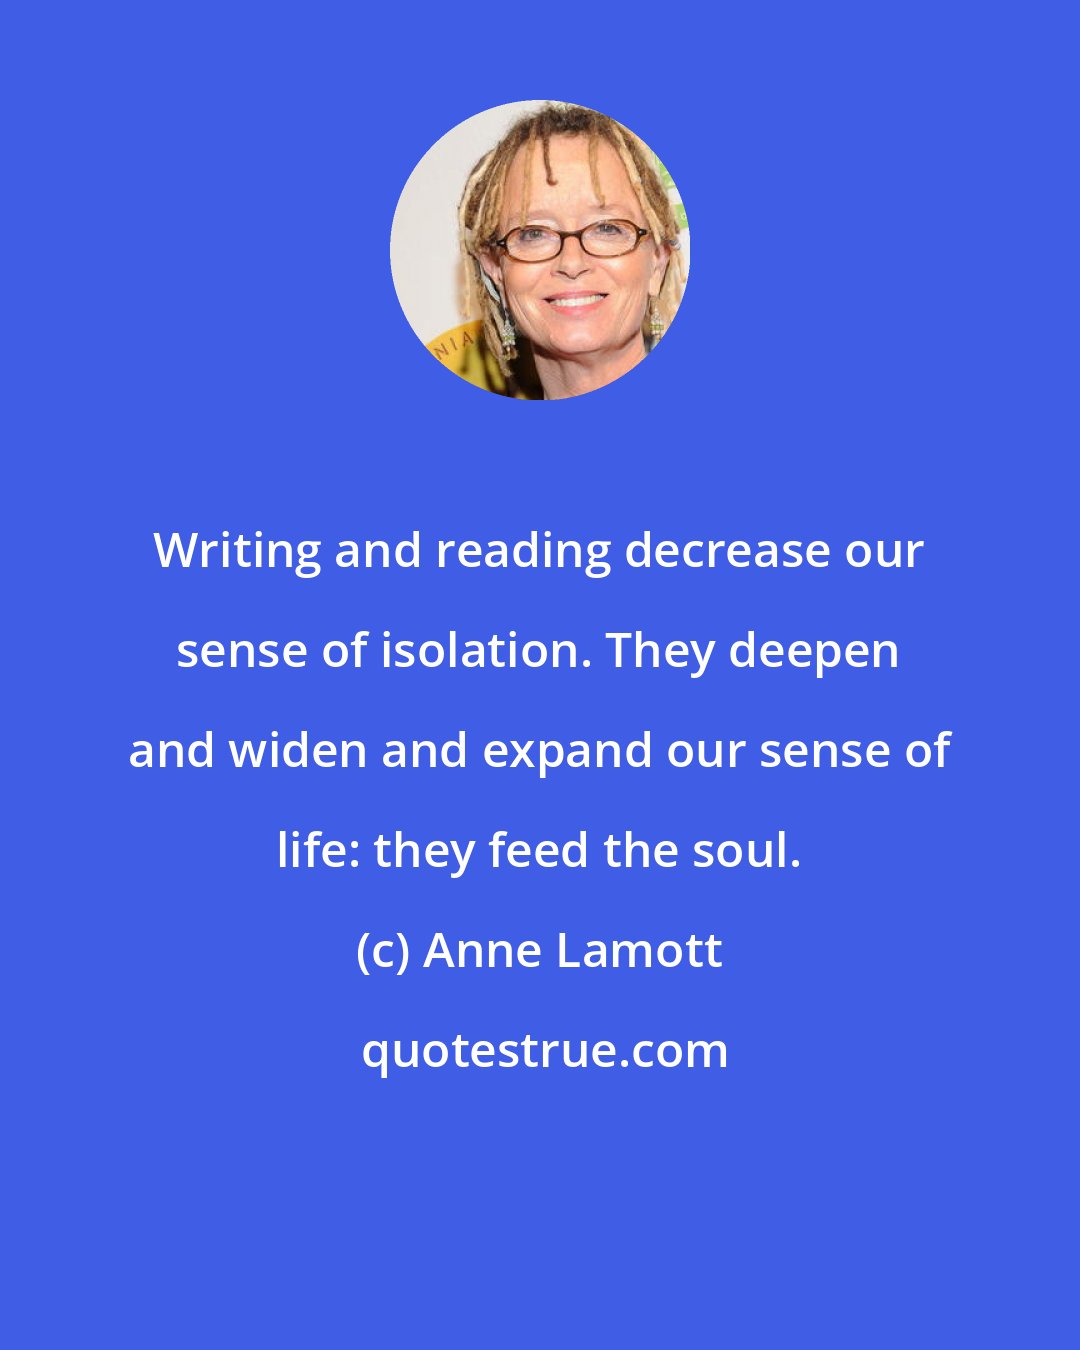 Anne Lamott: Writing and reading decrease our sense of isolation. They deepen and widen and expand our sense of life: they feed the soul.